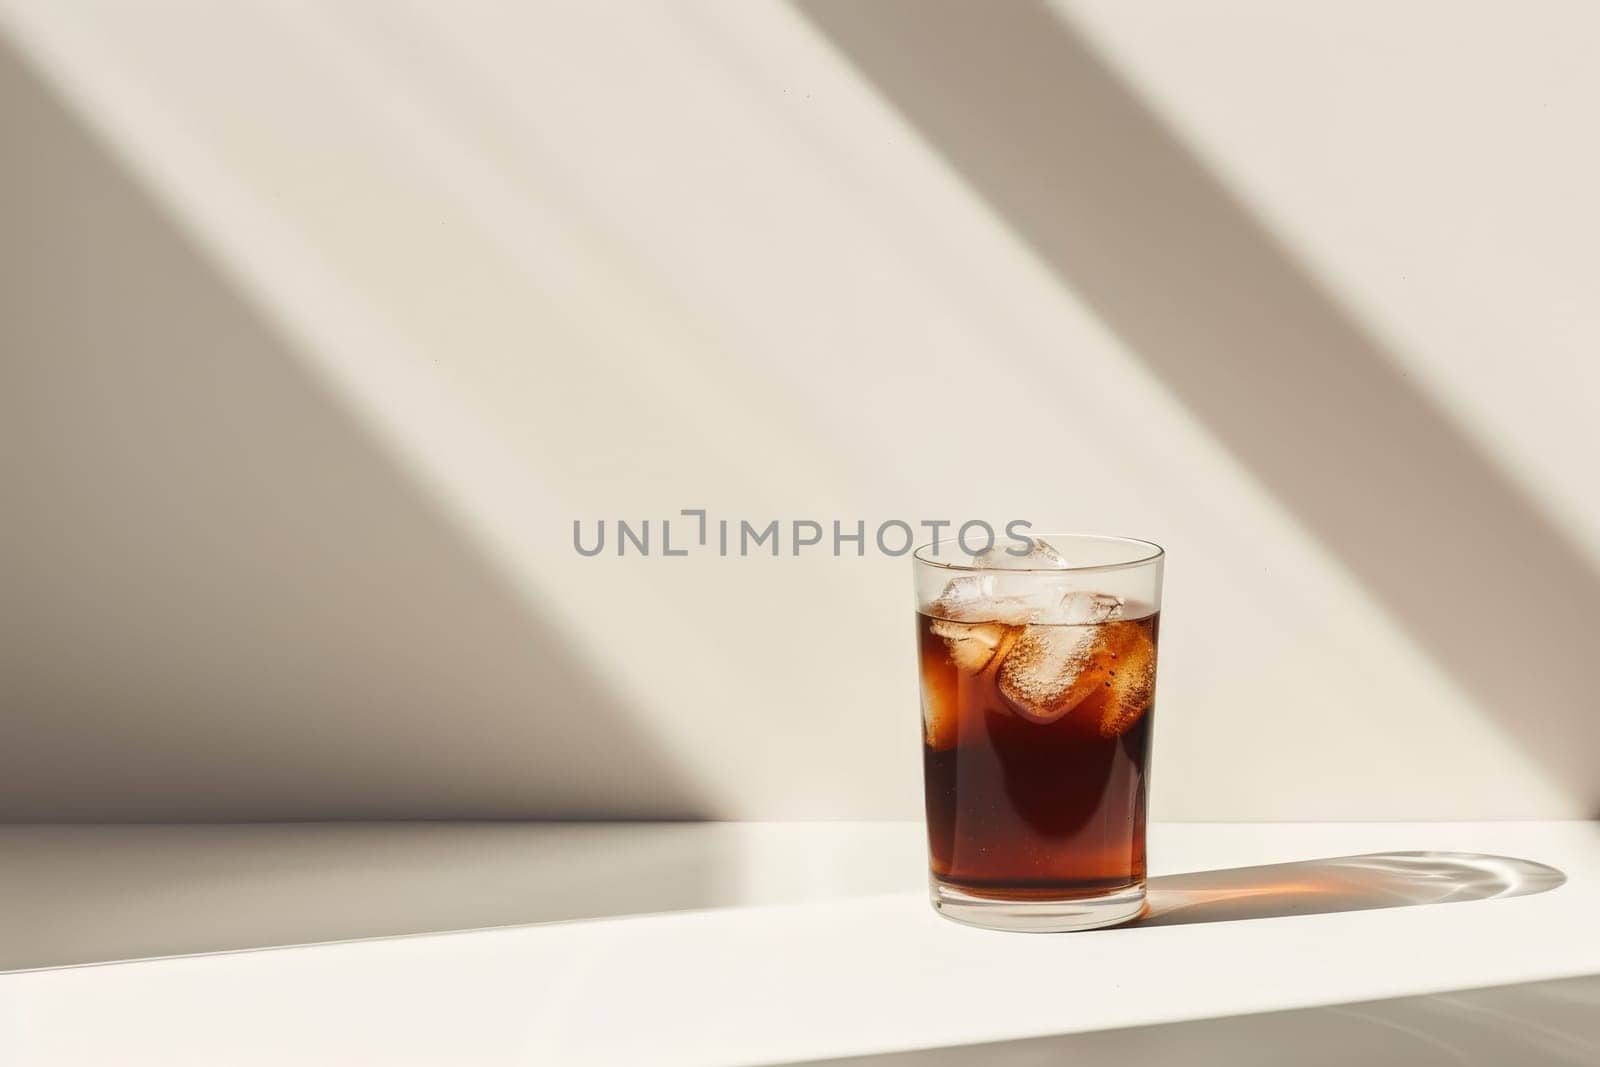 A glass of iced black coffee on white background and Clean composition, minimal style by nijieimu